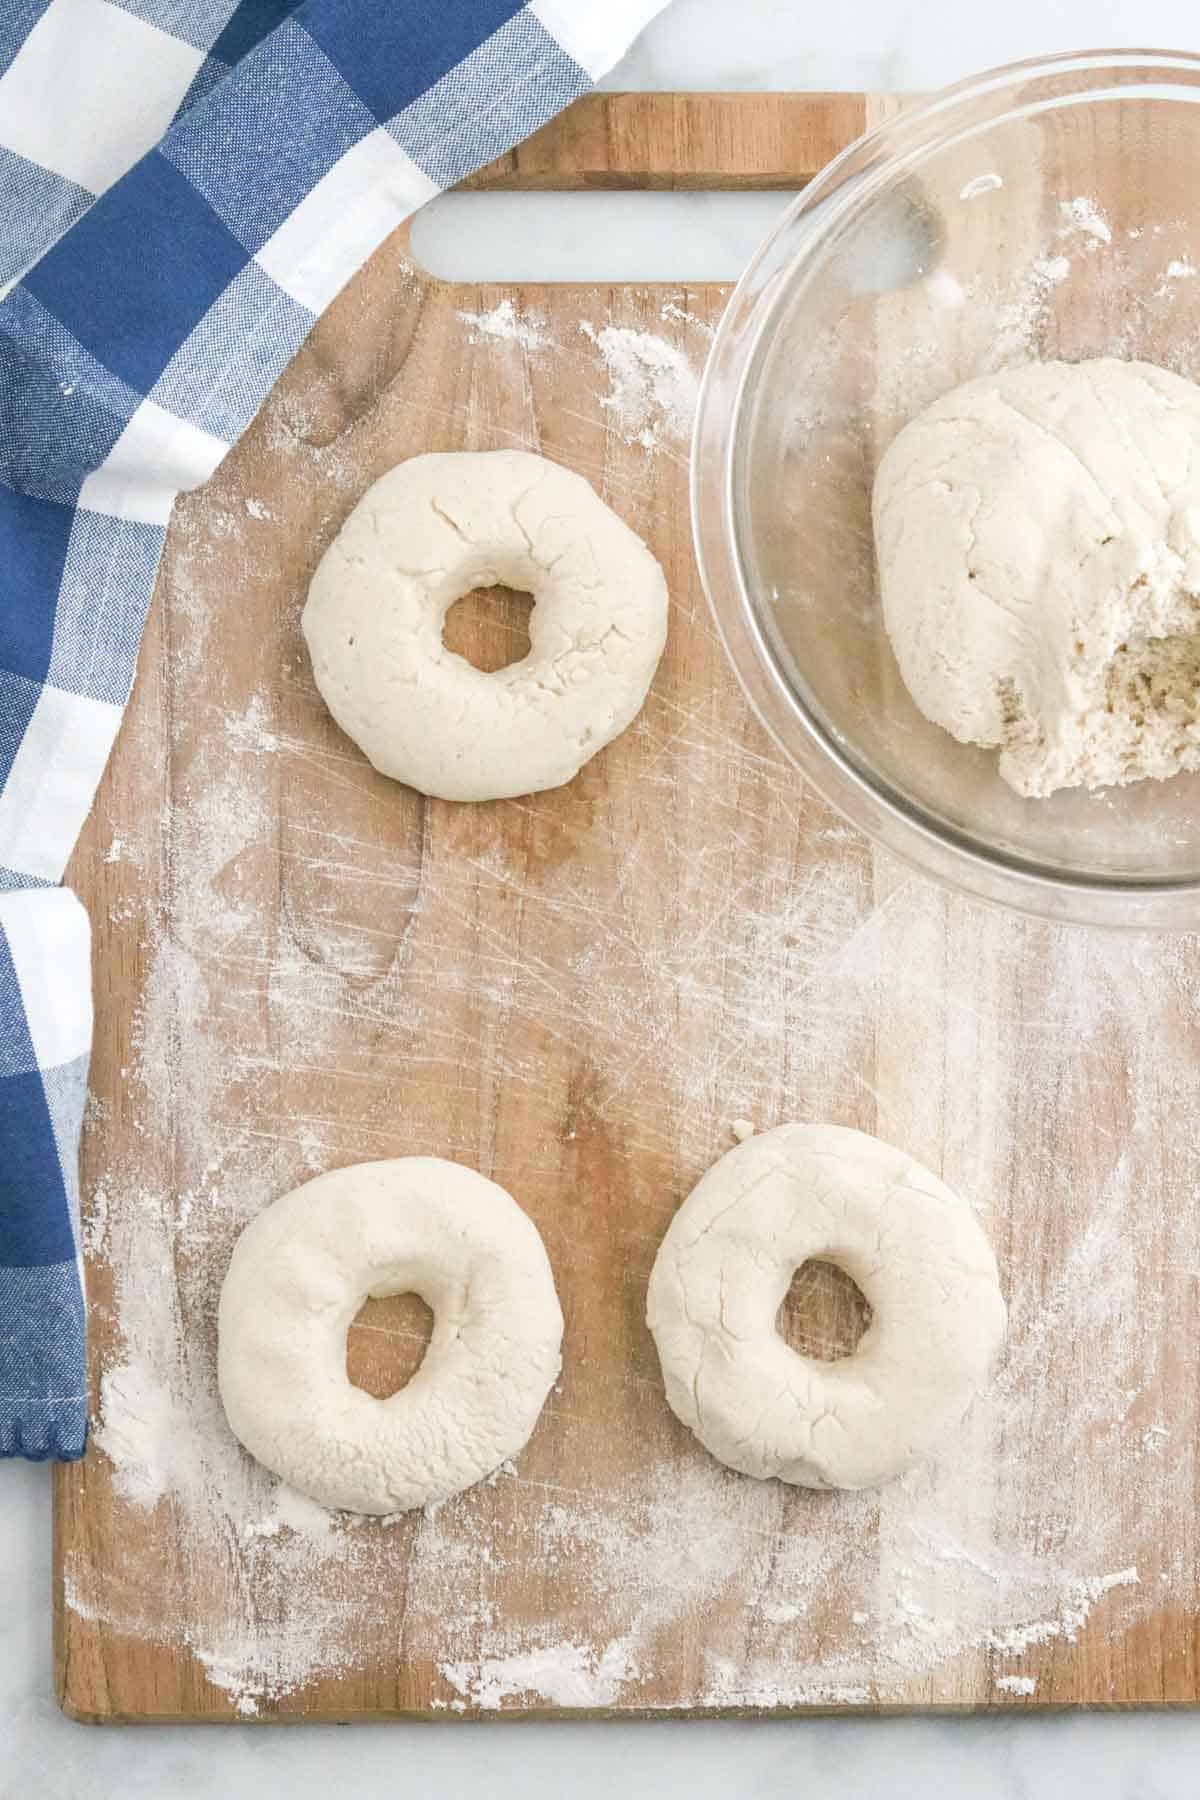 Bagel dough is rolled and shaped into bagels.